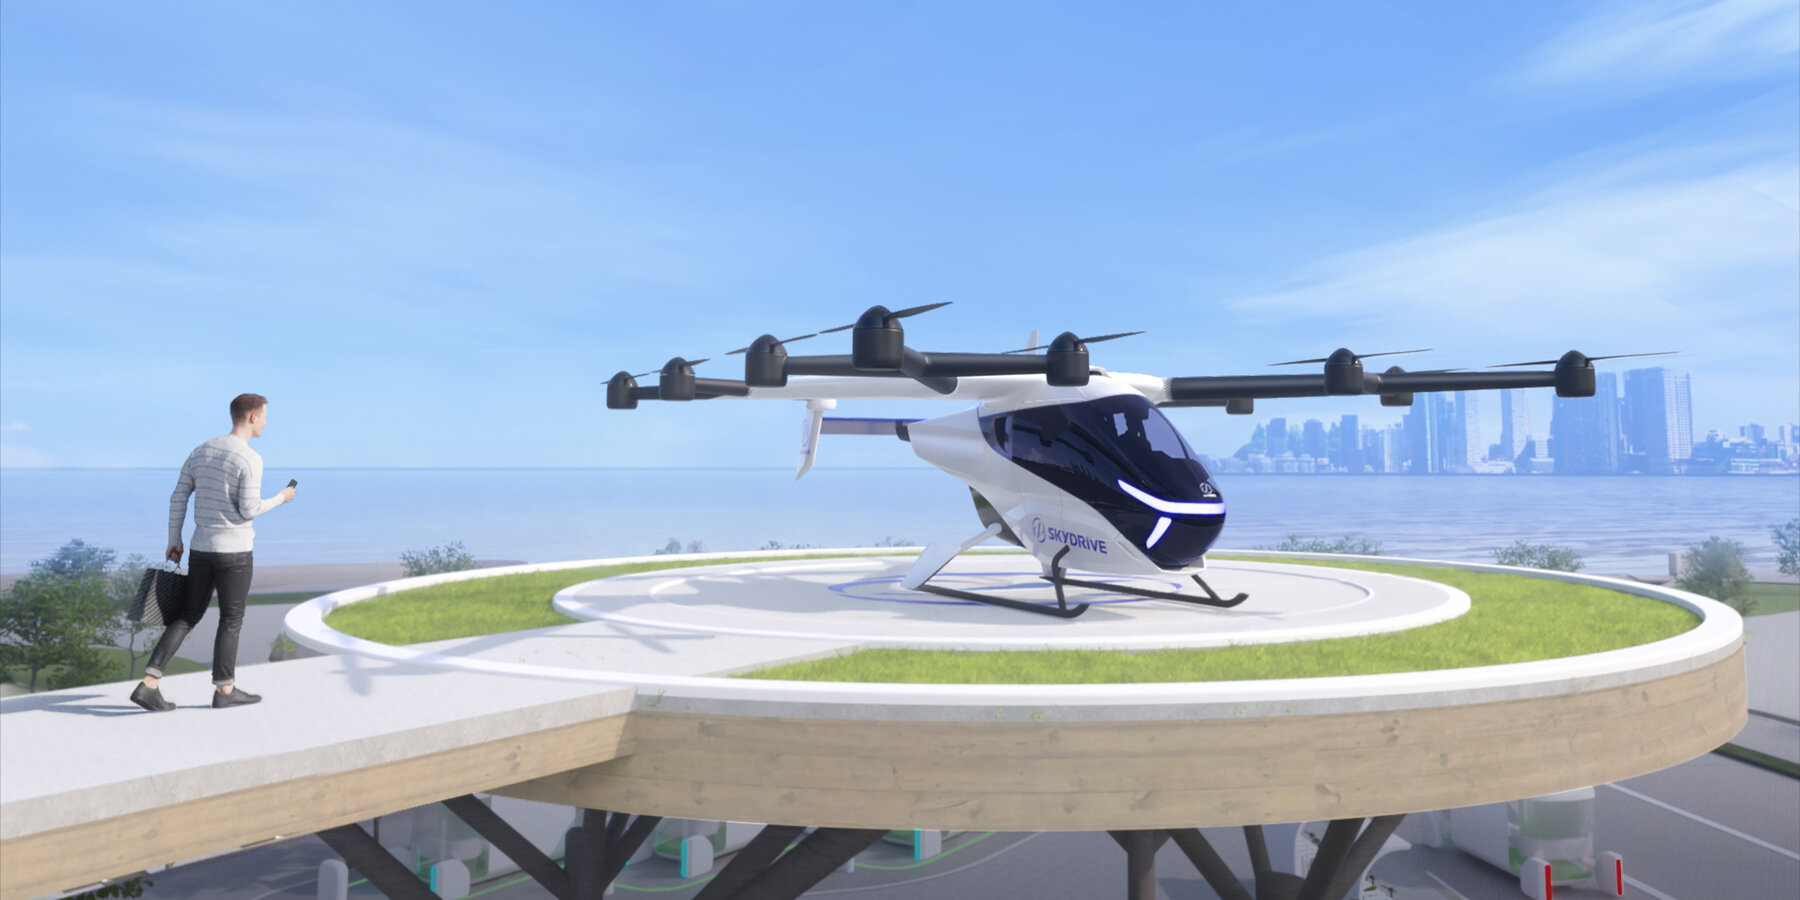 SkyDrive's SD-05 flying car unveiled for future air taxi in japan